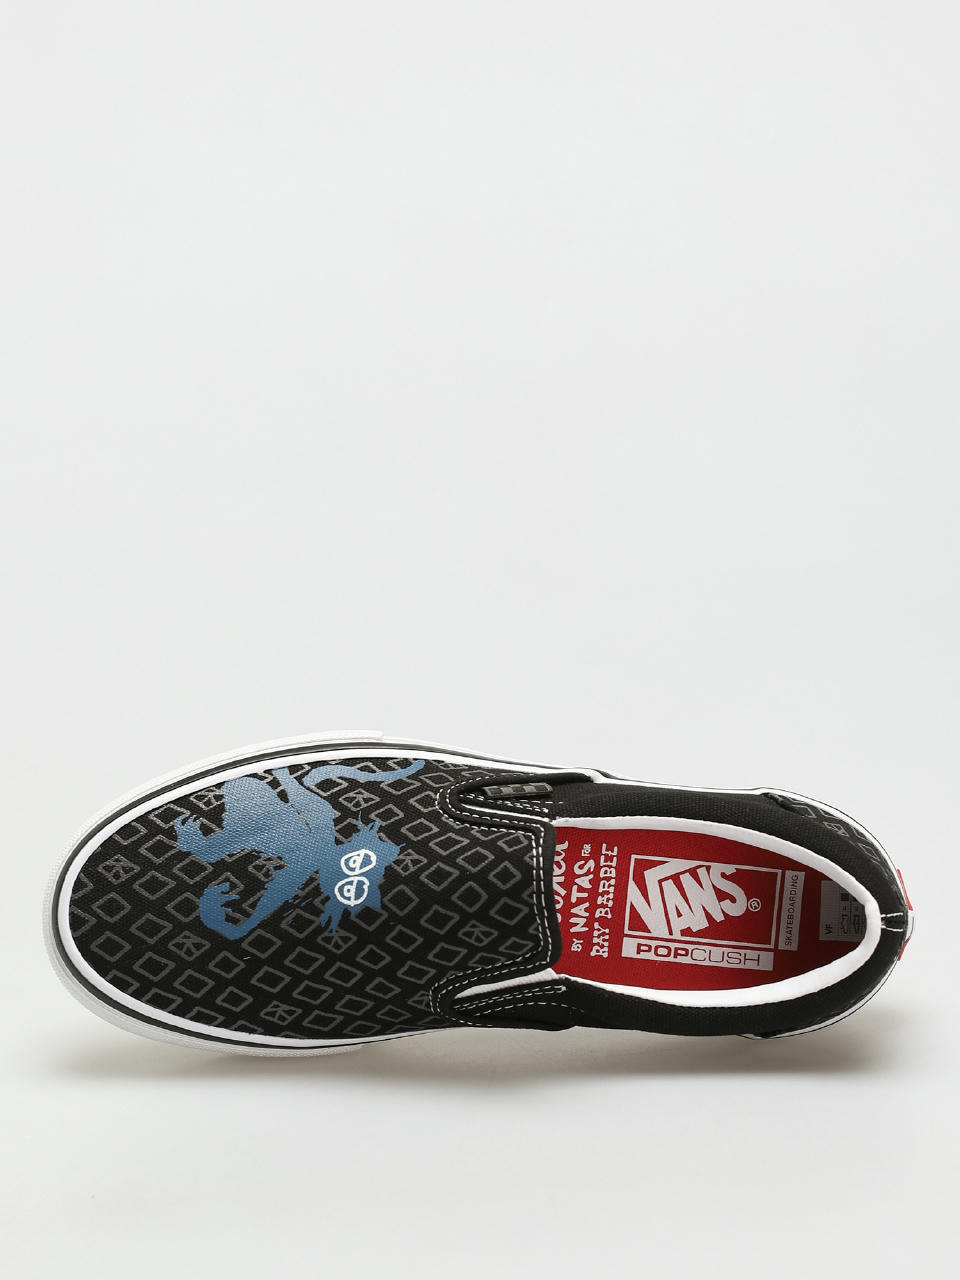 Vans X KROOKED Skate Slip On Shoes (by natas for ray/black)